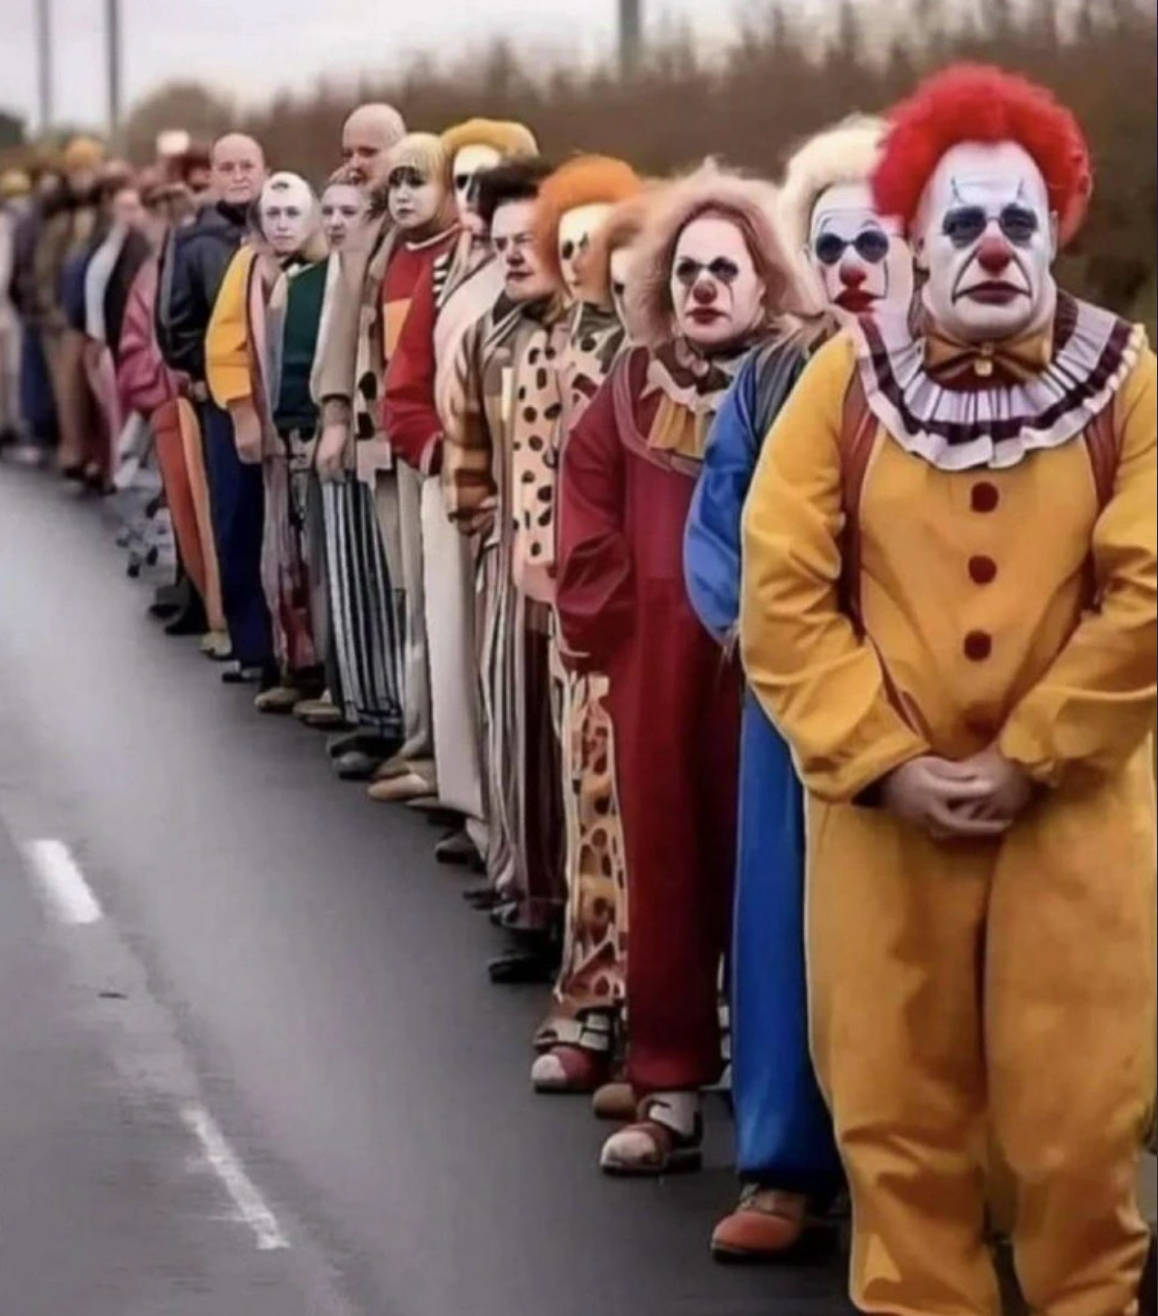 High Quality Clowns Lining Up Blank Meme Template